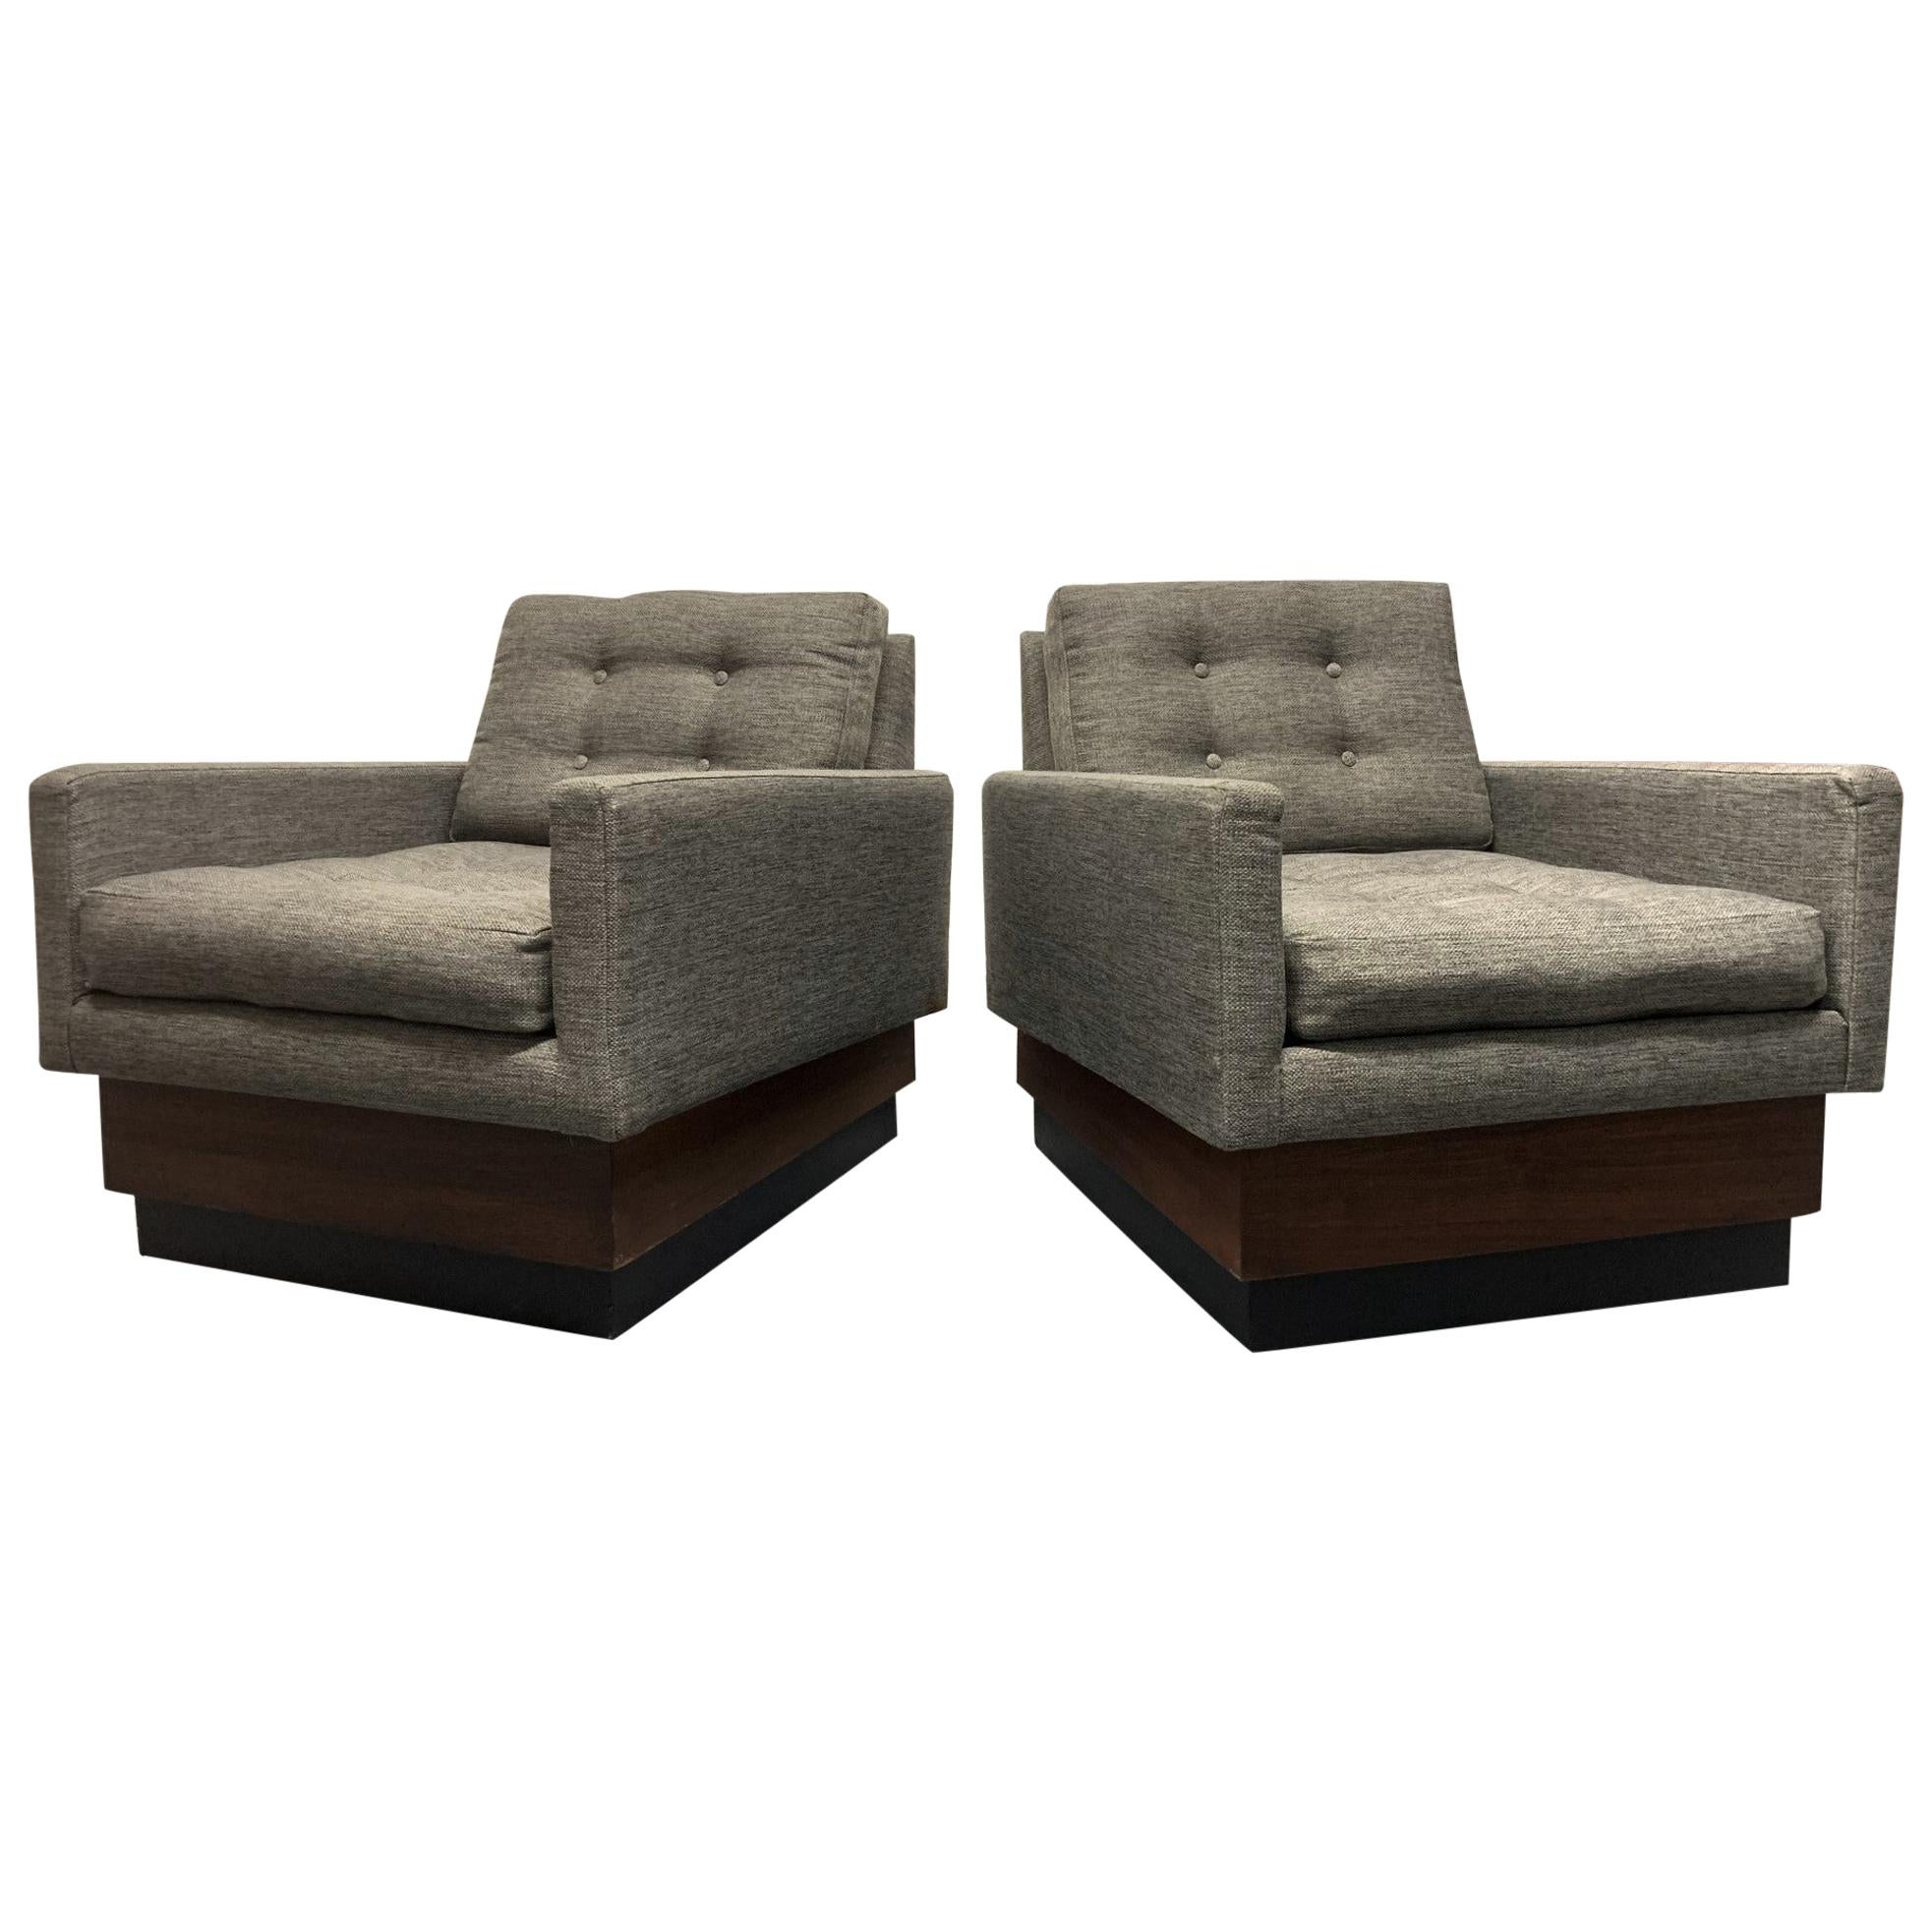 Pair of Lounge Chairs on Plinth Base For Sale